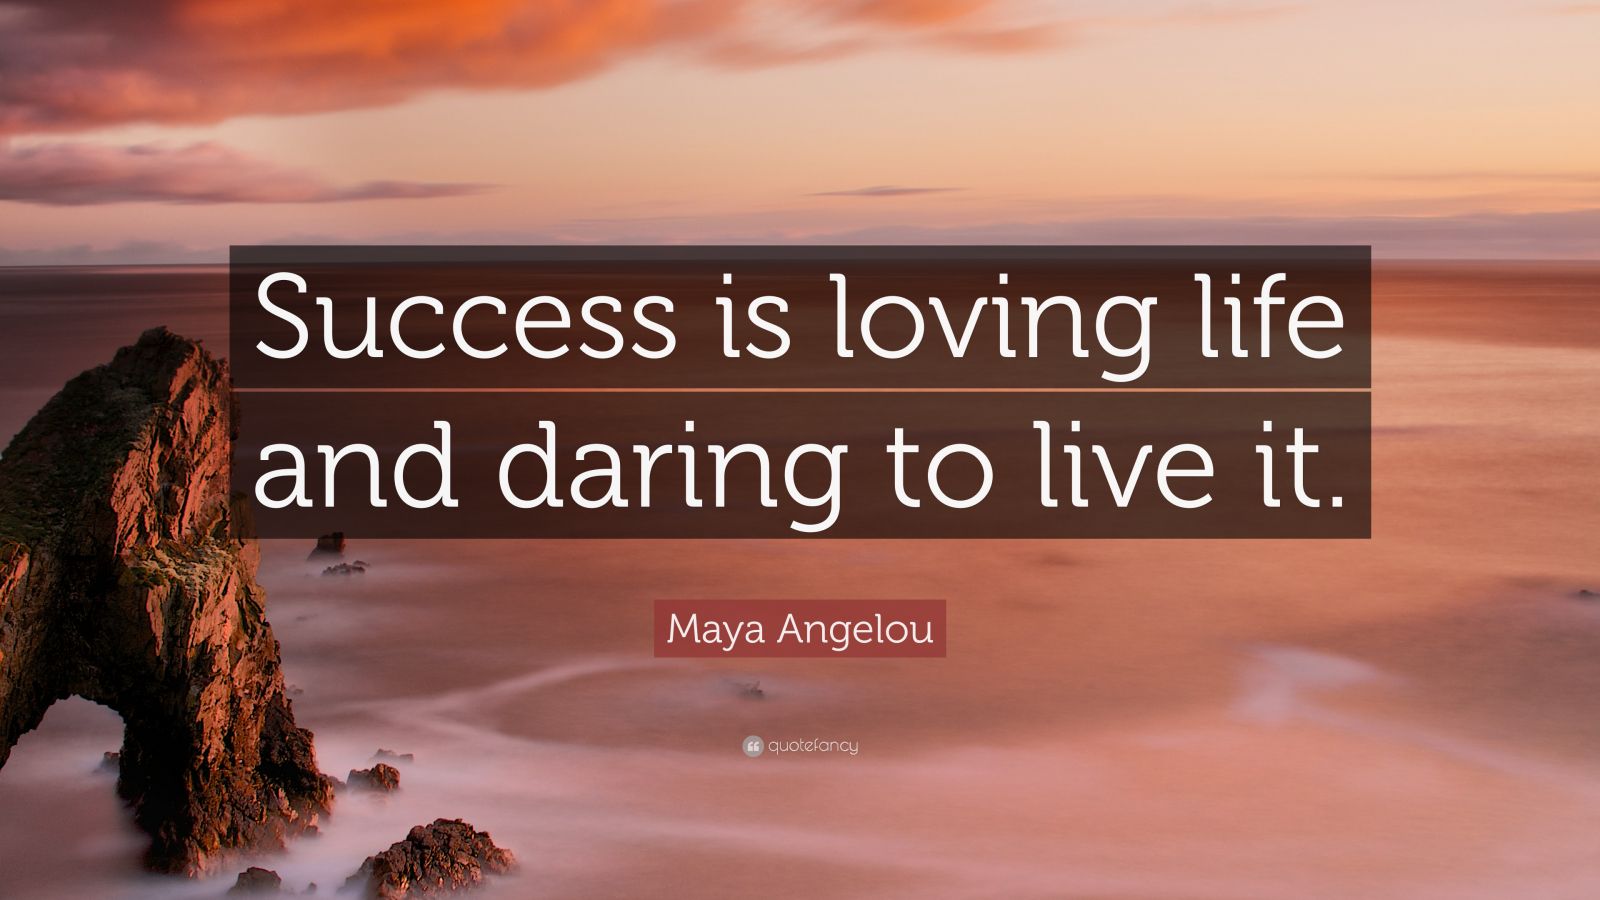 Maya Angelou Quote: “Success is loving life and daring to live it.” (21